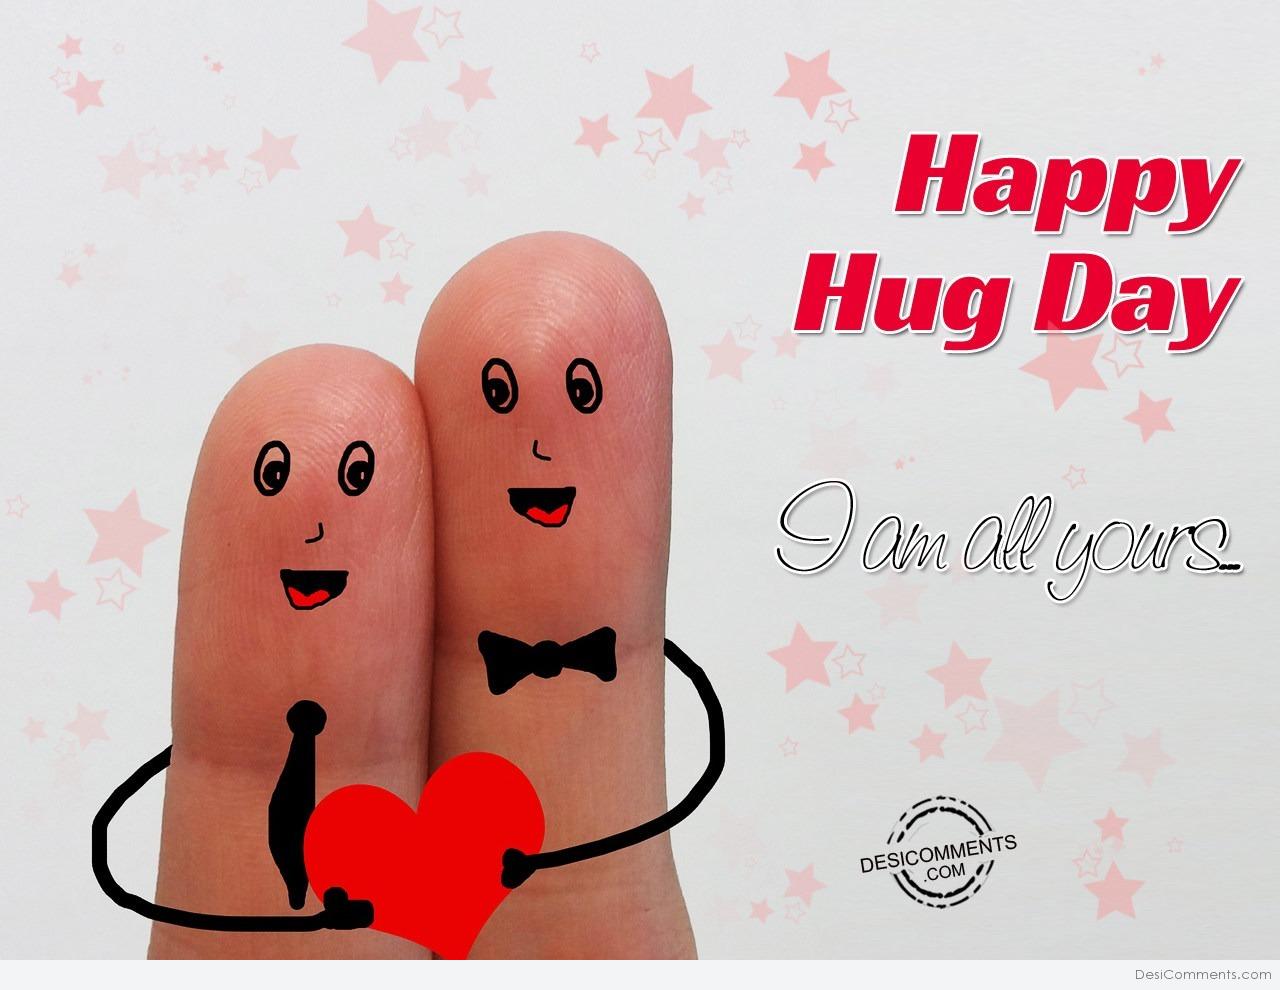 Happy Hug Day I Am All Yours… - DesiComments.com